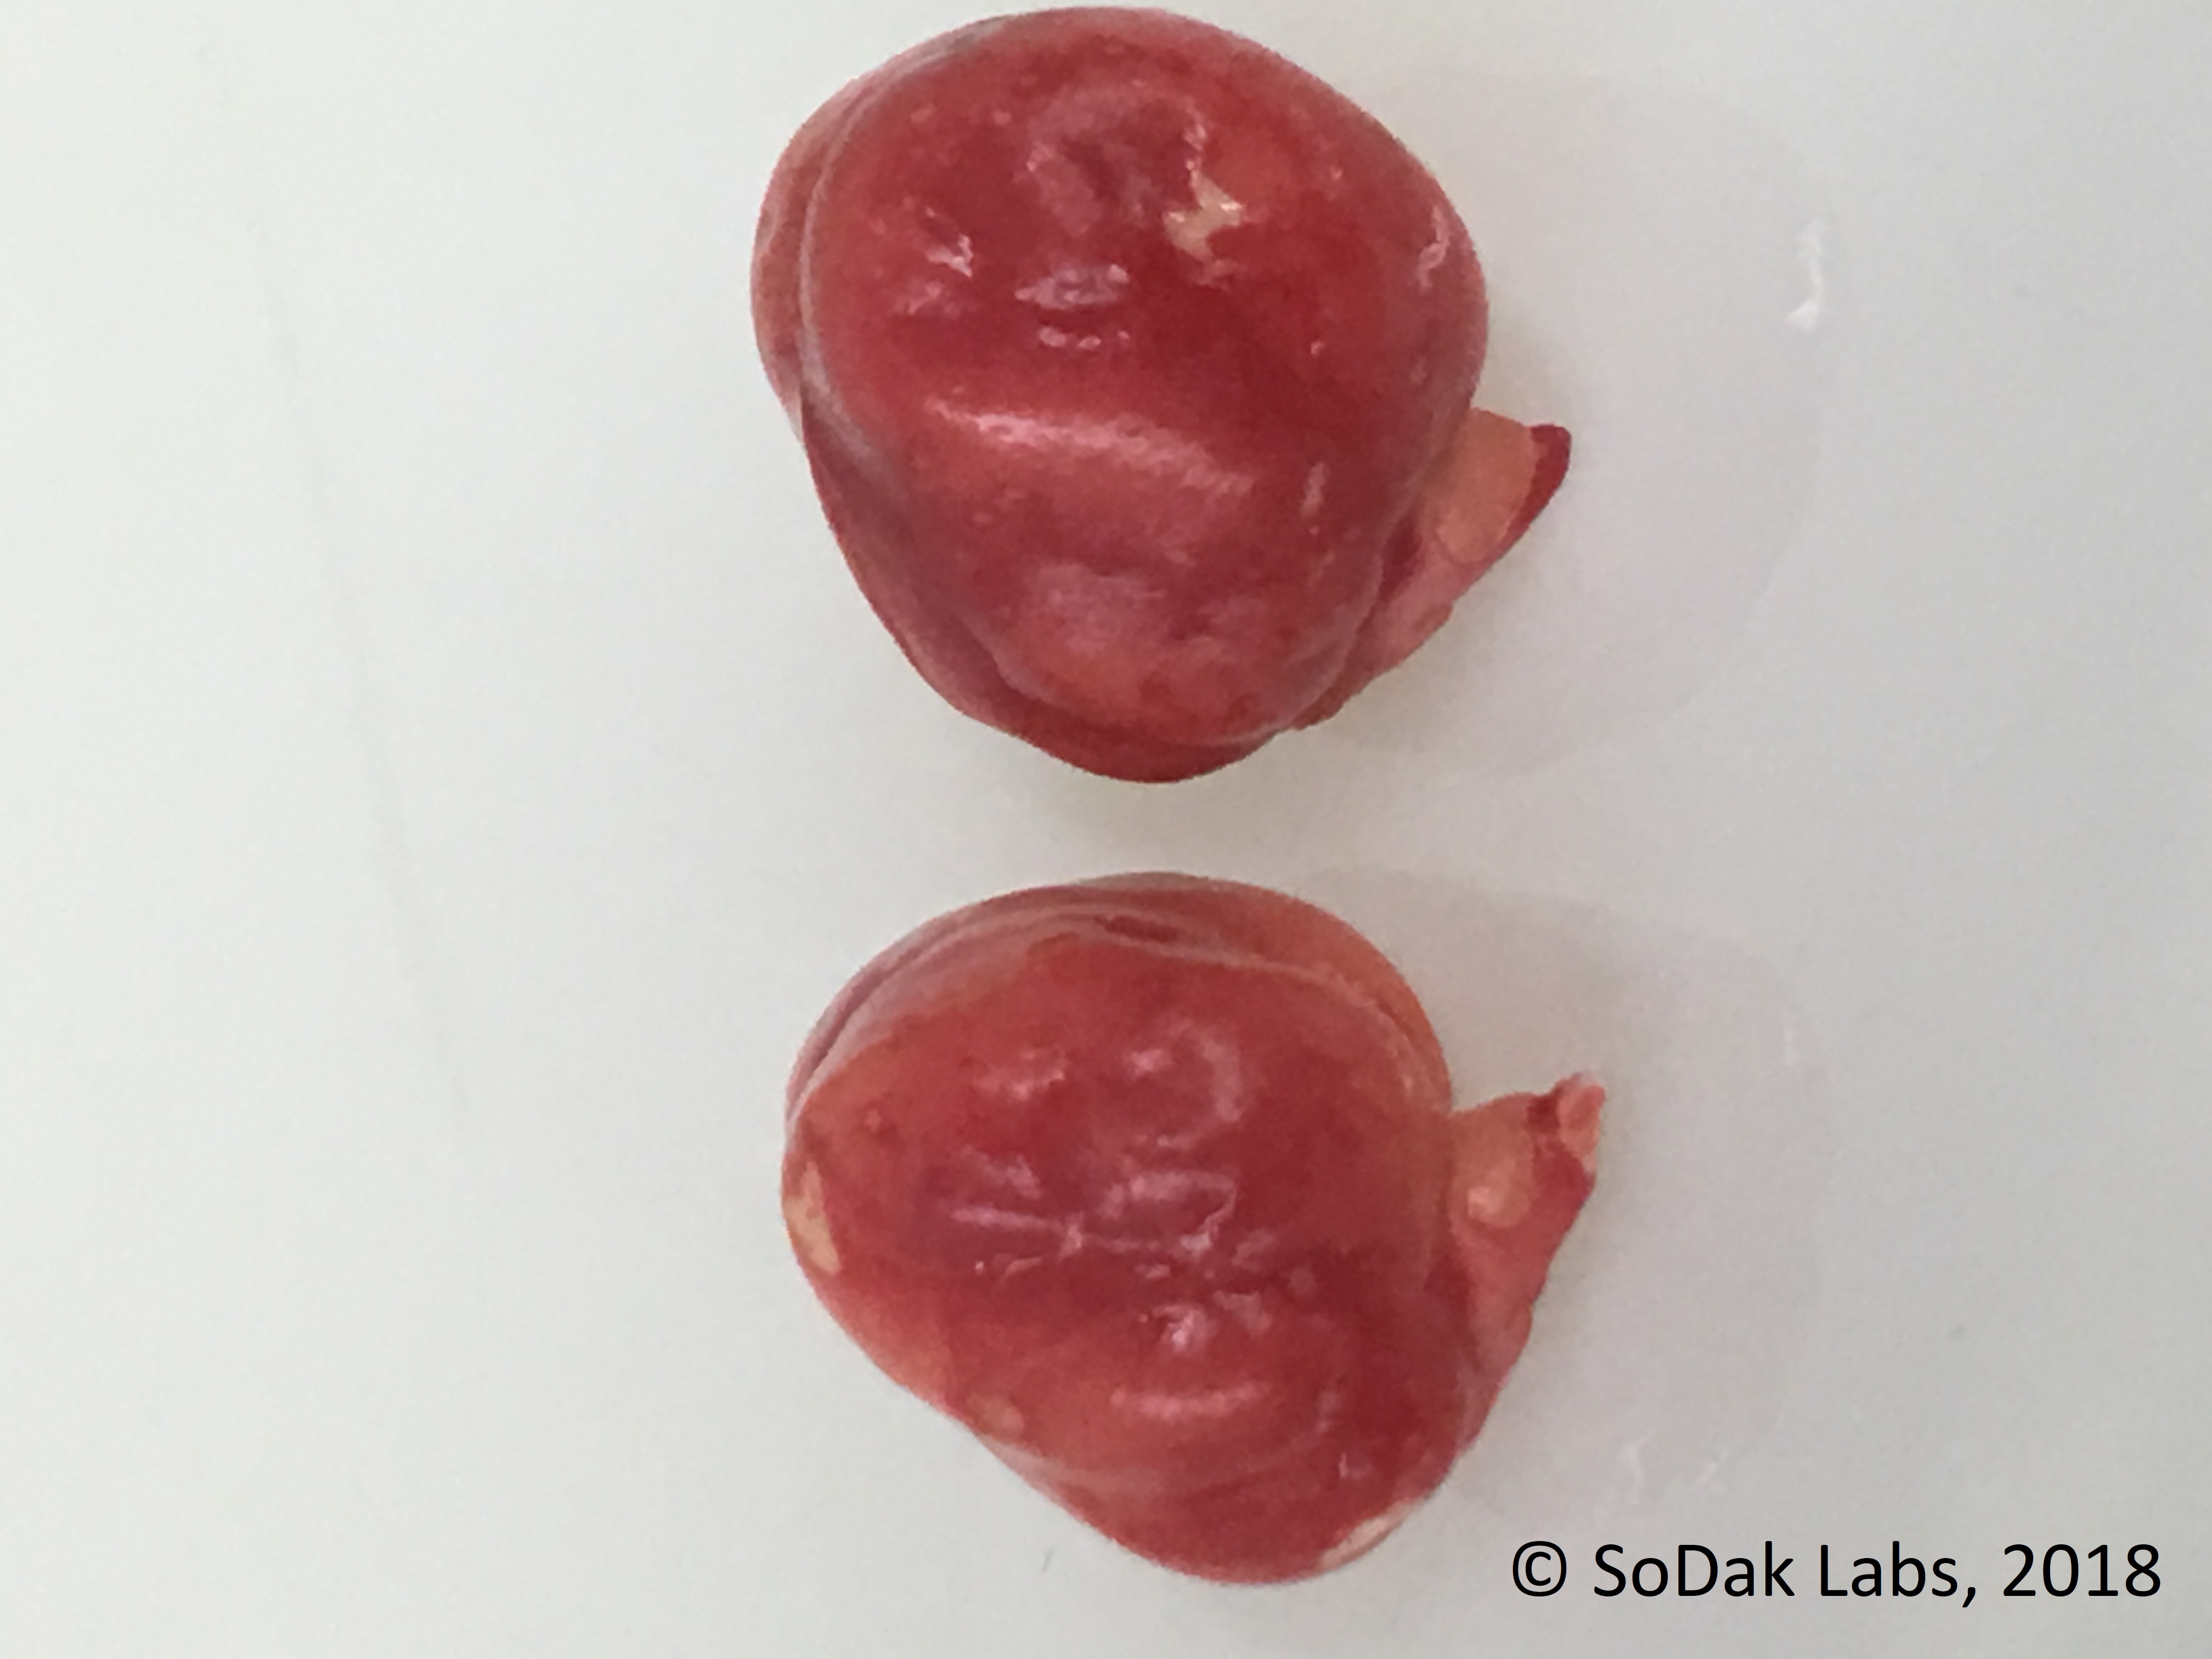 Chickpeas showing red staining from Tetrazolium testing